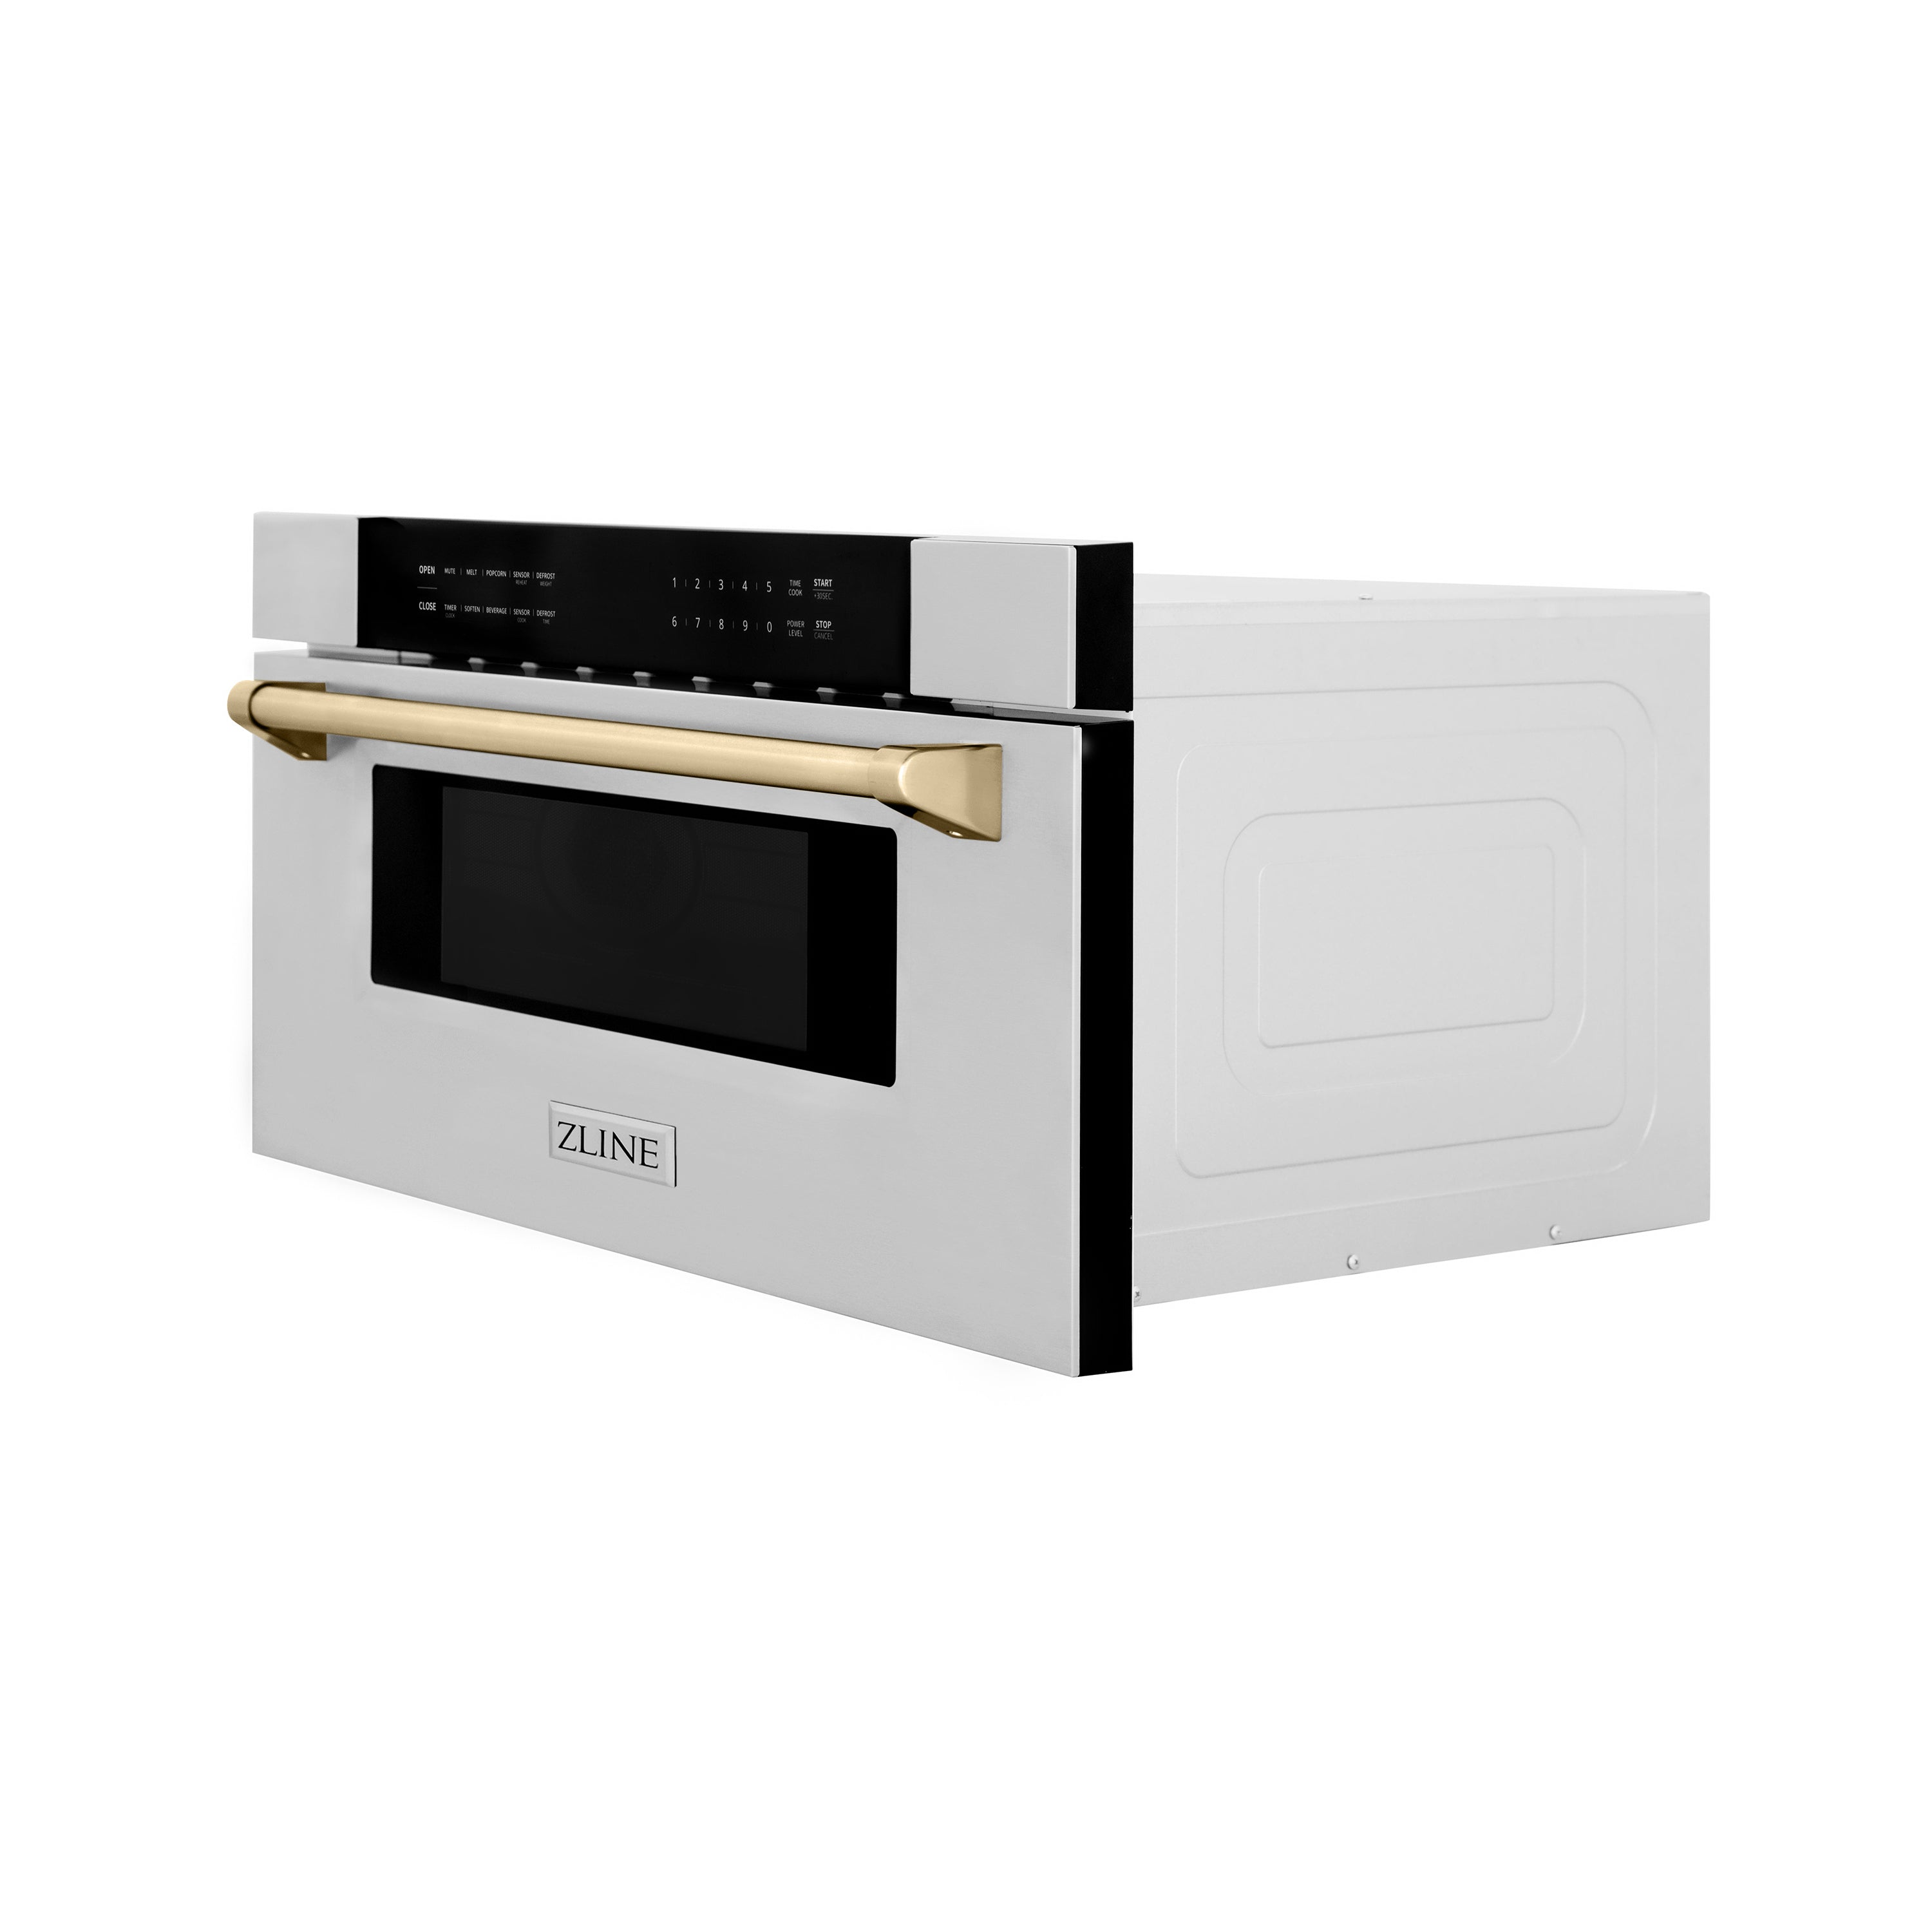 ZLINE Autograph Edition 30 in. 1.2 cu. ft. Built-In Microwave Drawer in Stainless Steel with Gold Accents (MWDZ-30-G) Side View Drawer Closed